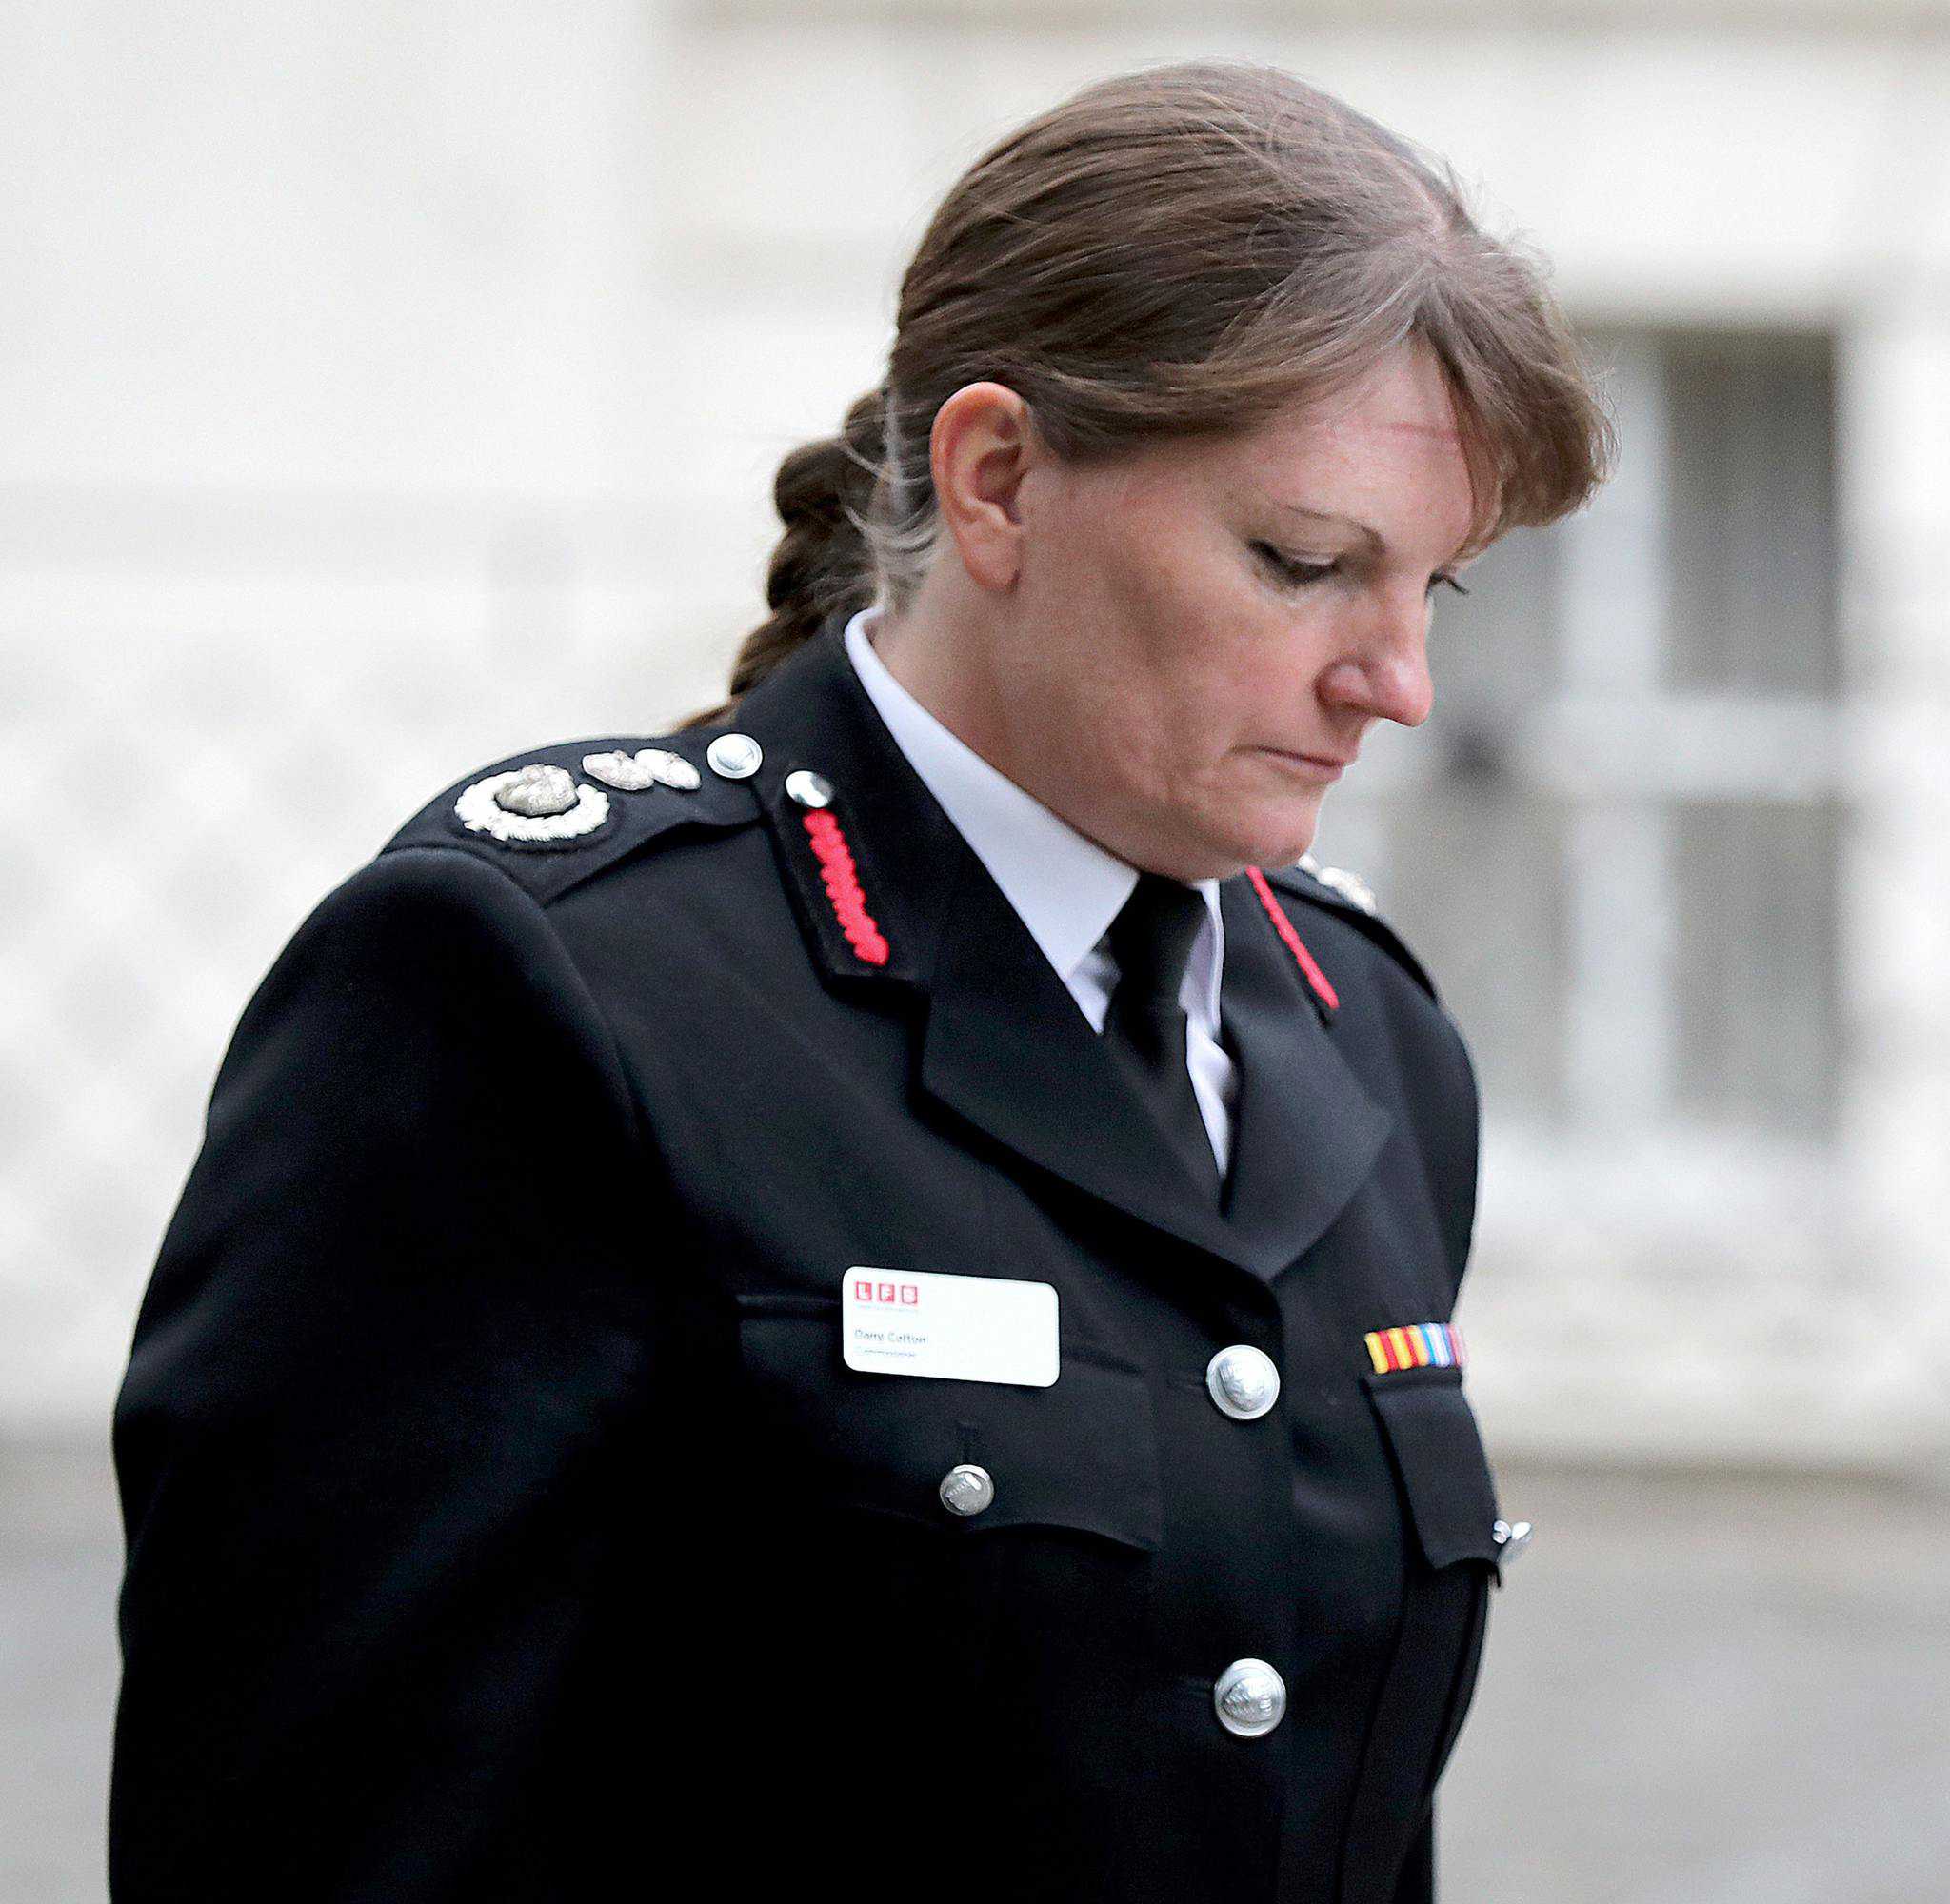 London fire chief to step down earlier than expected in wake of Grenfell criticism